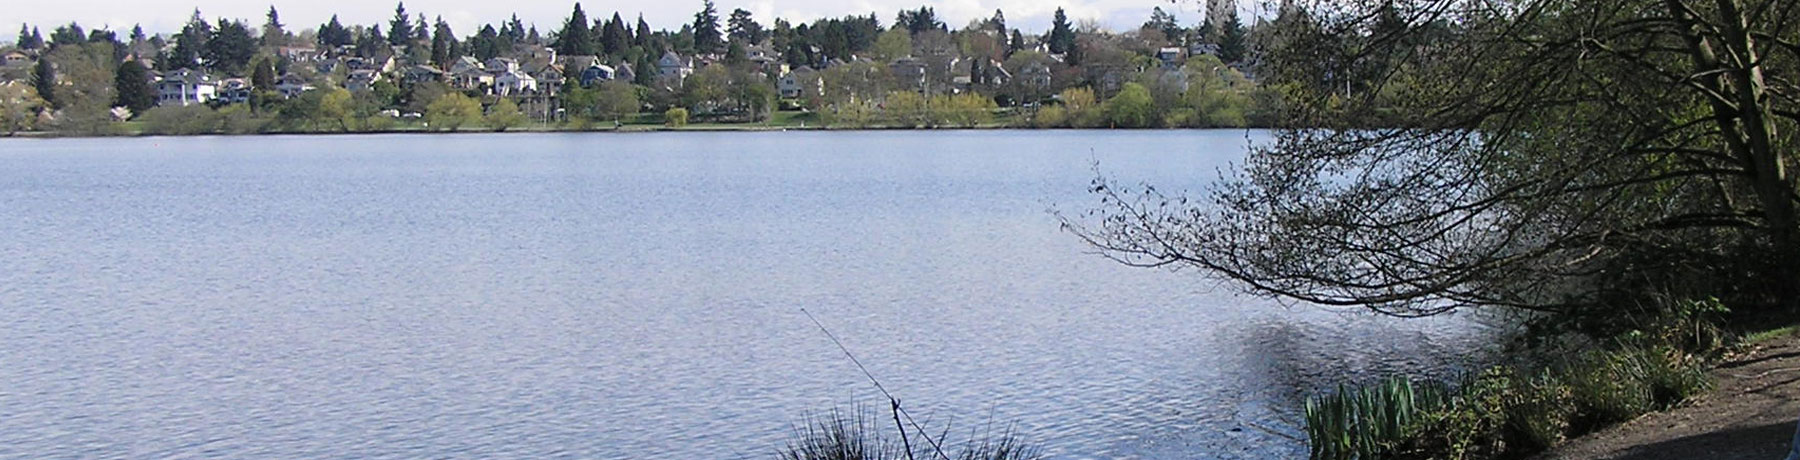 About The Green Lake Area